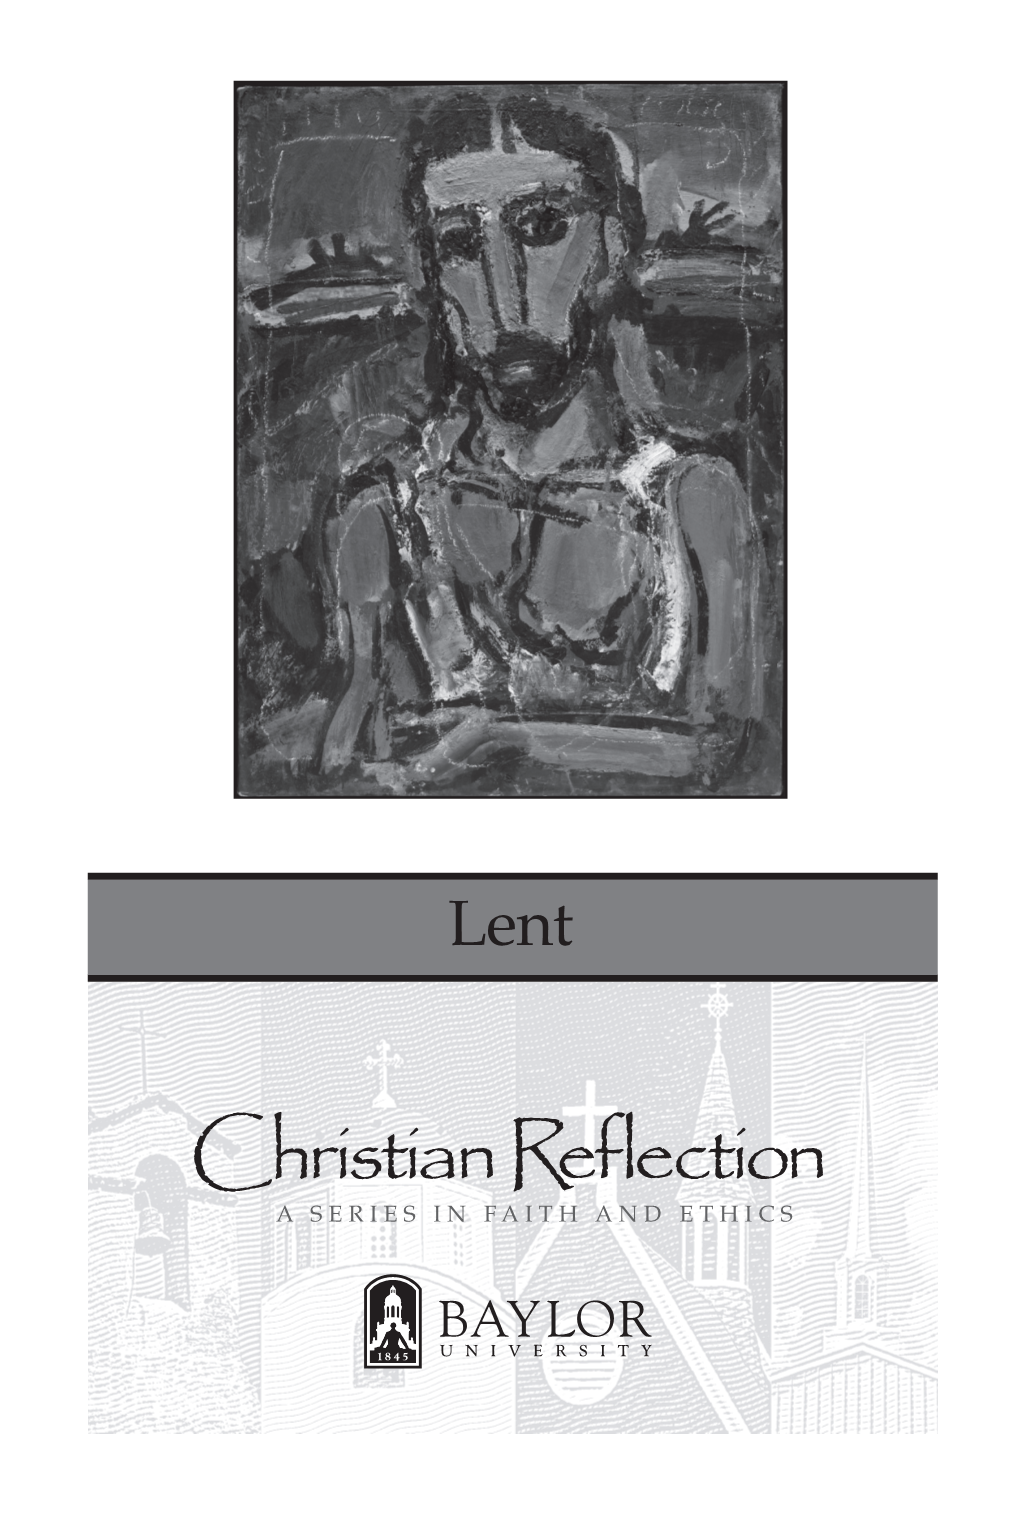 The Early History of Lent 18 Nicholas V